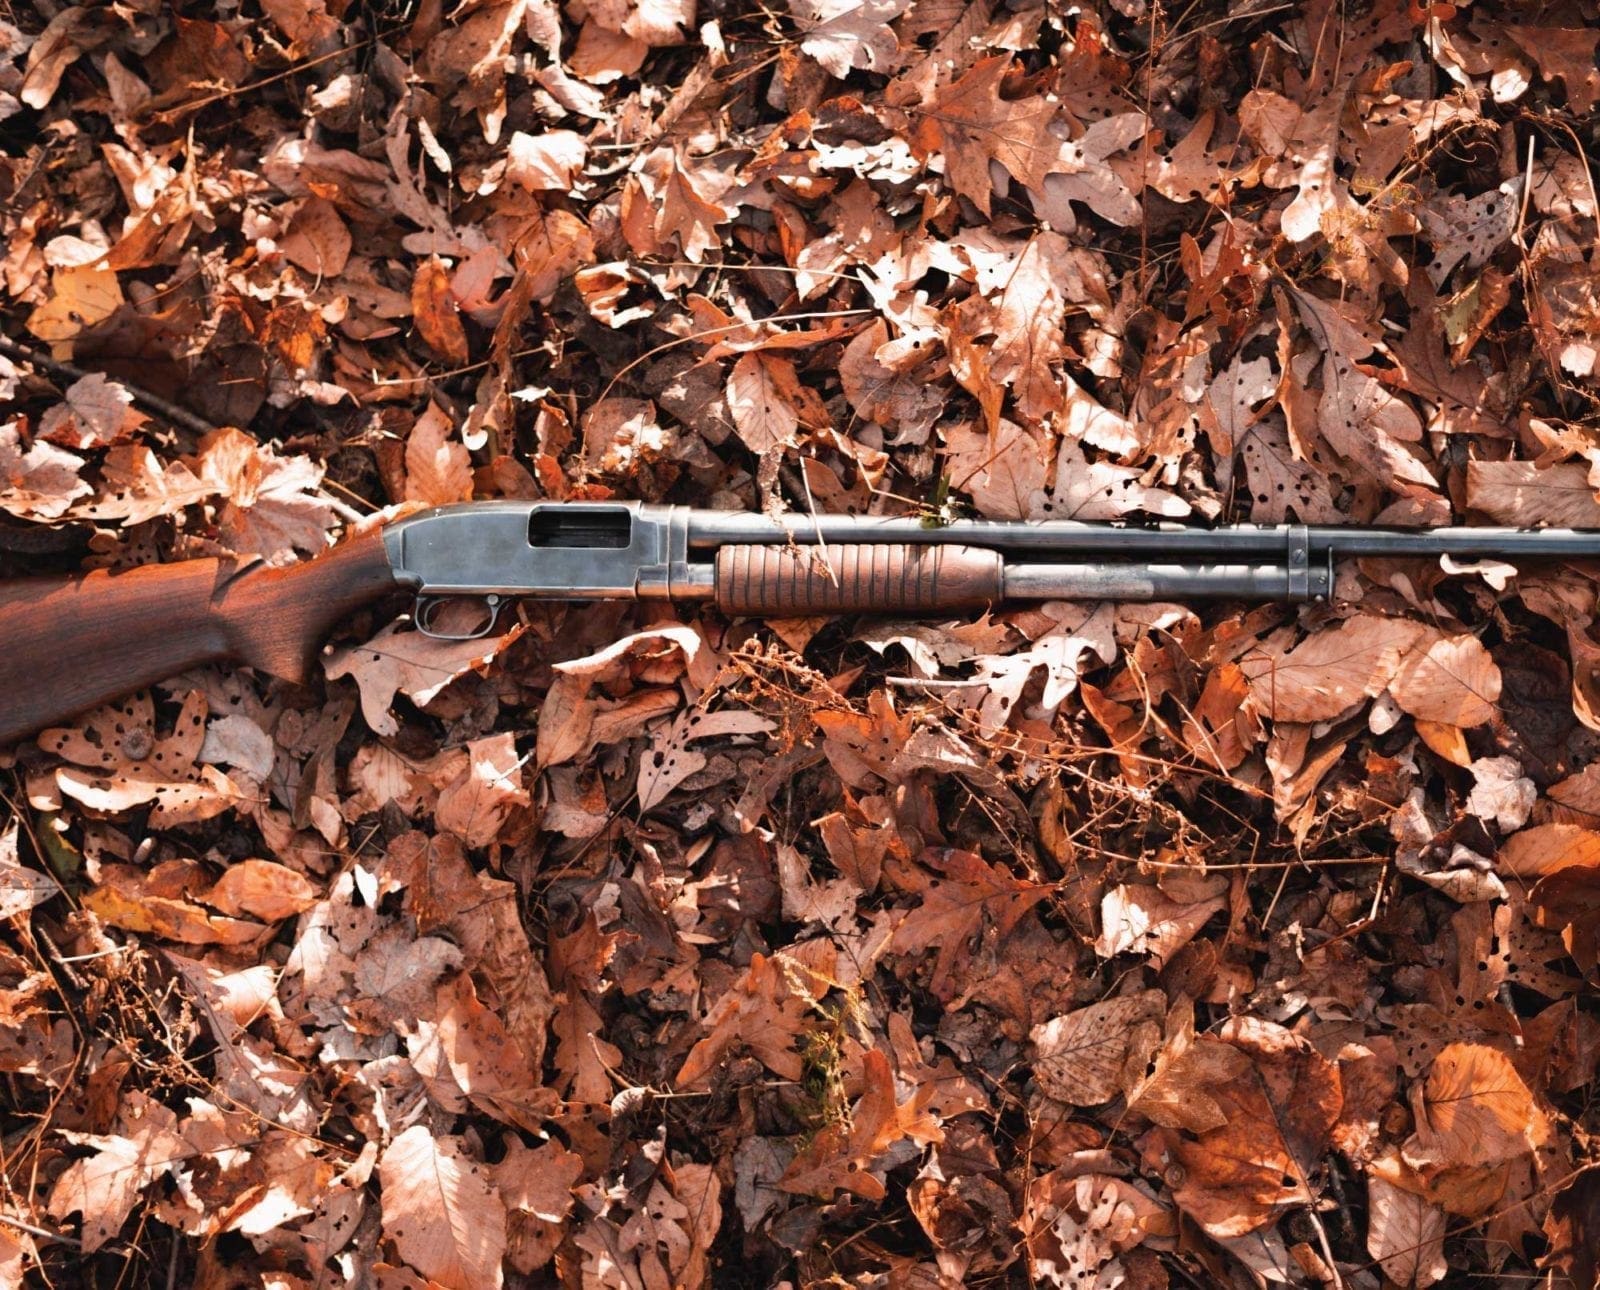 A Model 12 shotgun laid out on the ground